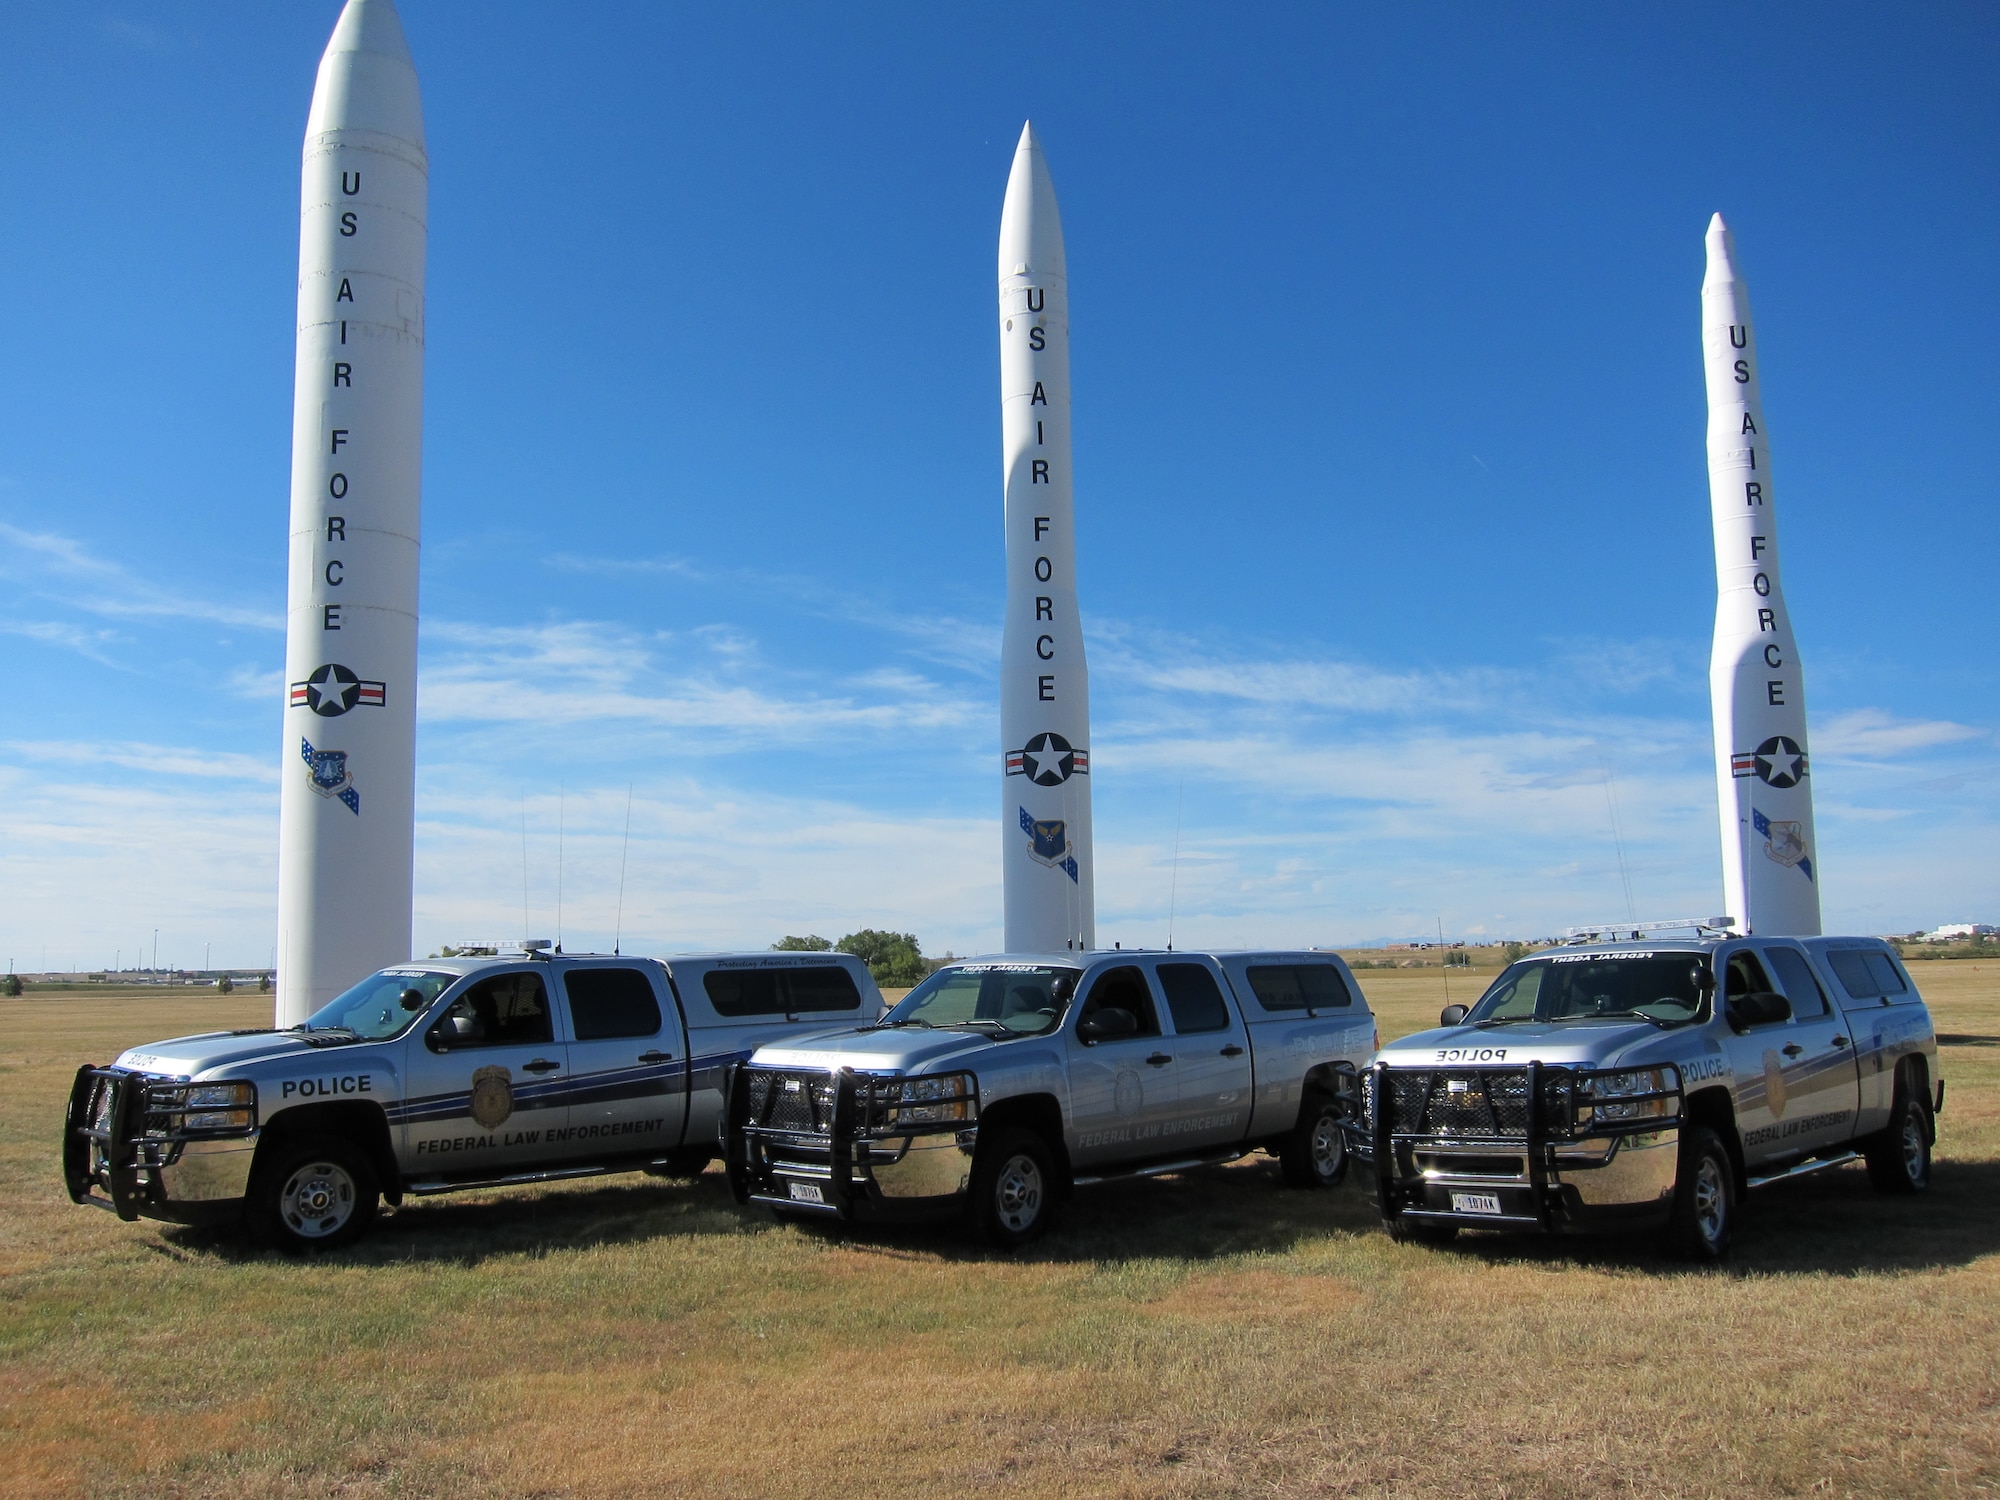 Three of OSI's new trucks stand ready to support the Air Force's Global Strike Mission. (U.S. Air Force Photo)